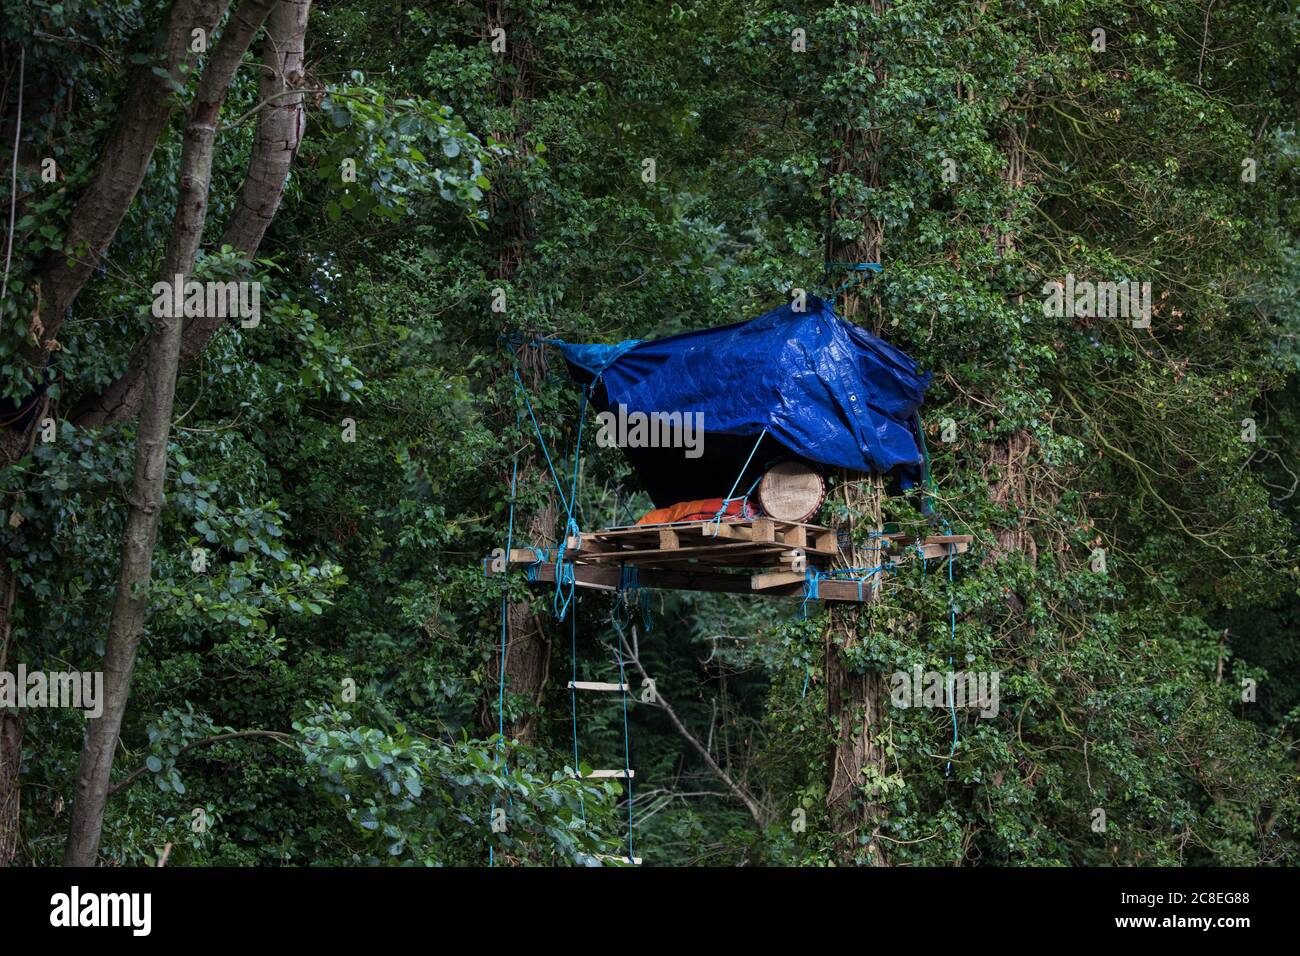 Denham, UK. 23 July, 2020. A tree house built by environmental activists from HS2 Rebellion in Denham Country Park. Activists from umbrella group HS2 Rebellion based at camps along its route continue to protest against the HS2 high-speed rail link which is currently projected to cost £106bn and will remain a net contributor to CO2 emissions during its projected 120-year lifespan. Credit: Mark Kerrison/Alamy Live News Stock Photo